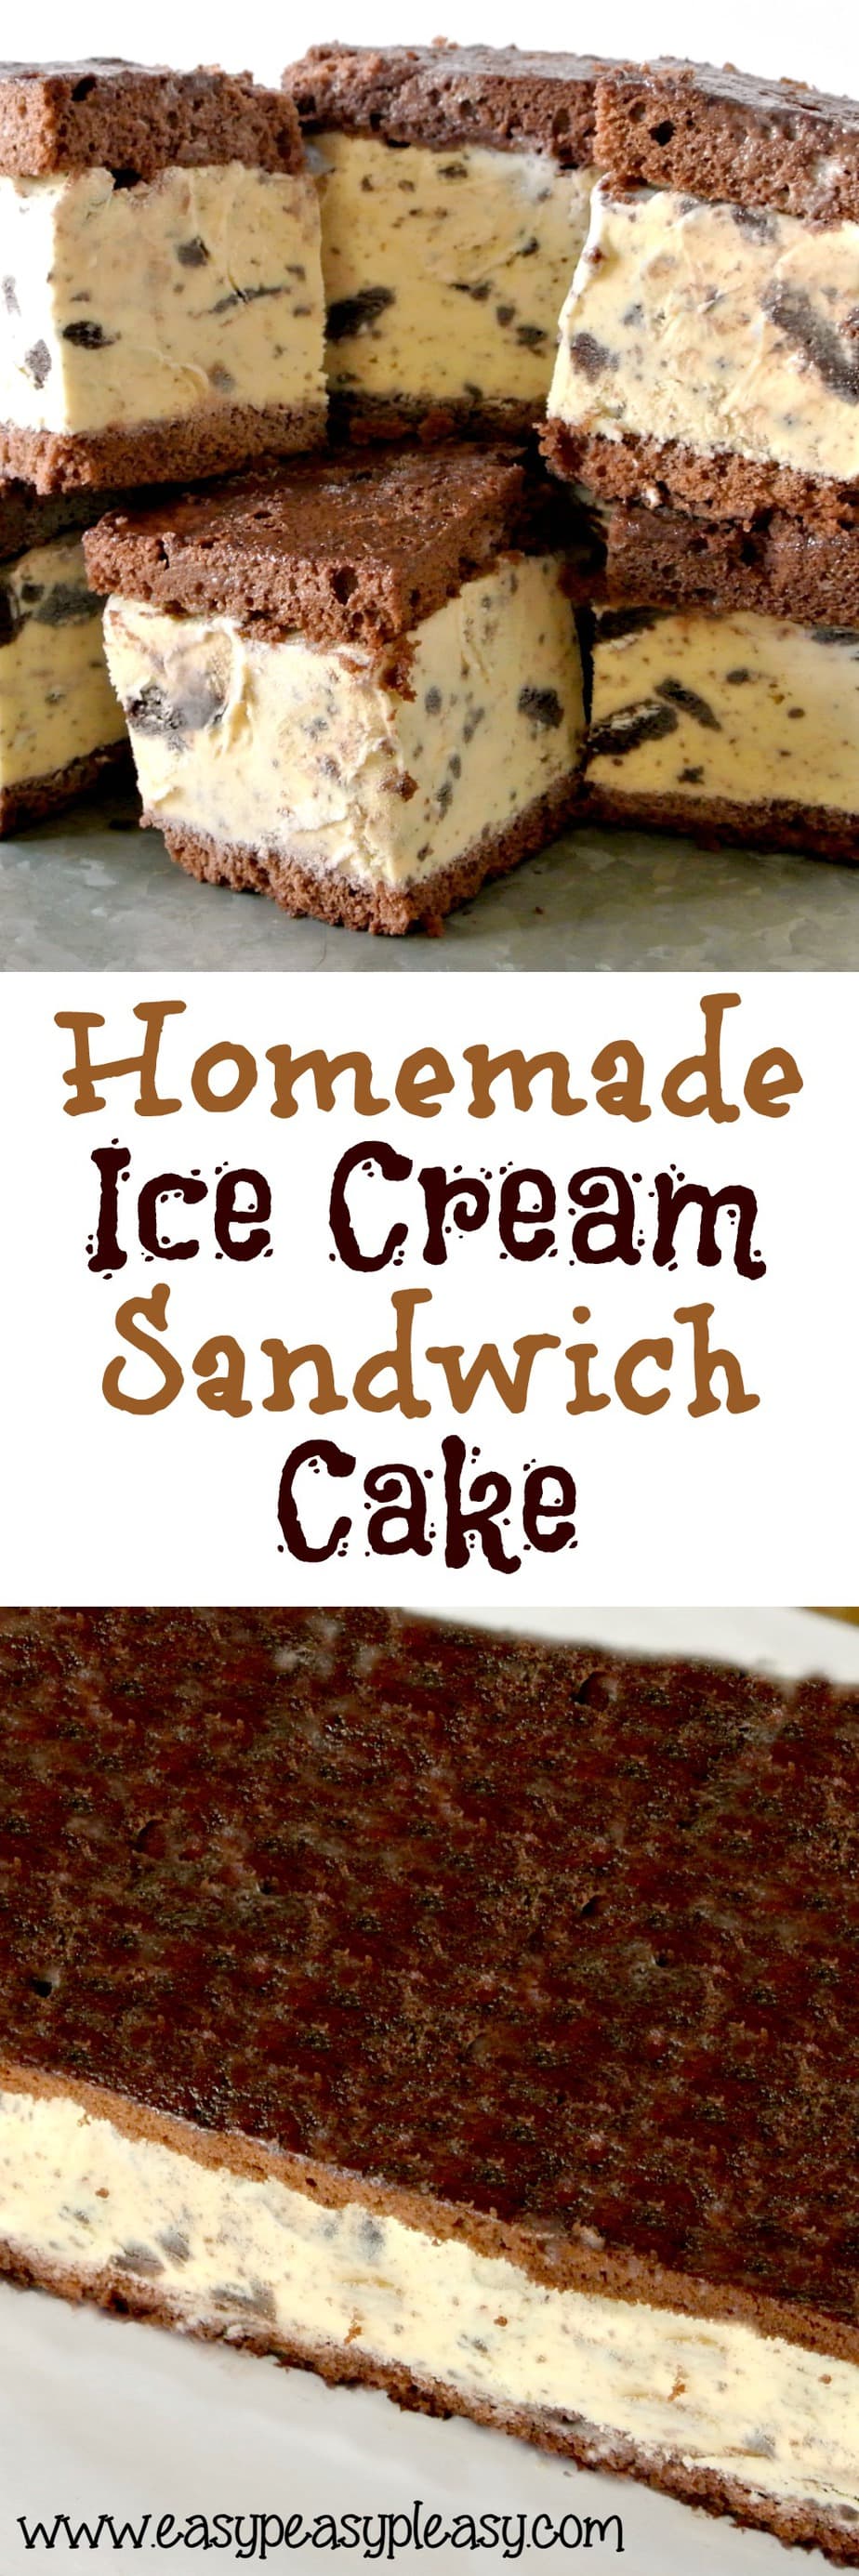 Easy Homemade Ice Cream Sandwich Cake is perfect for parties and much cheaper than store bought!